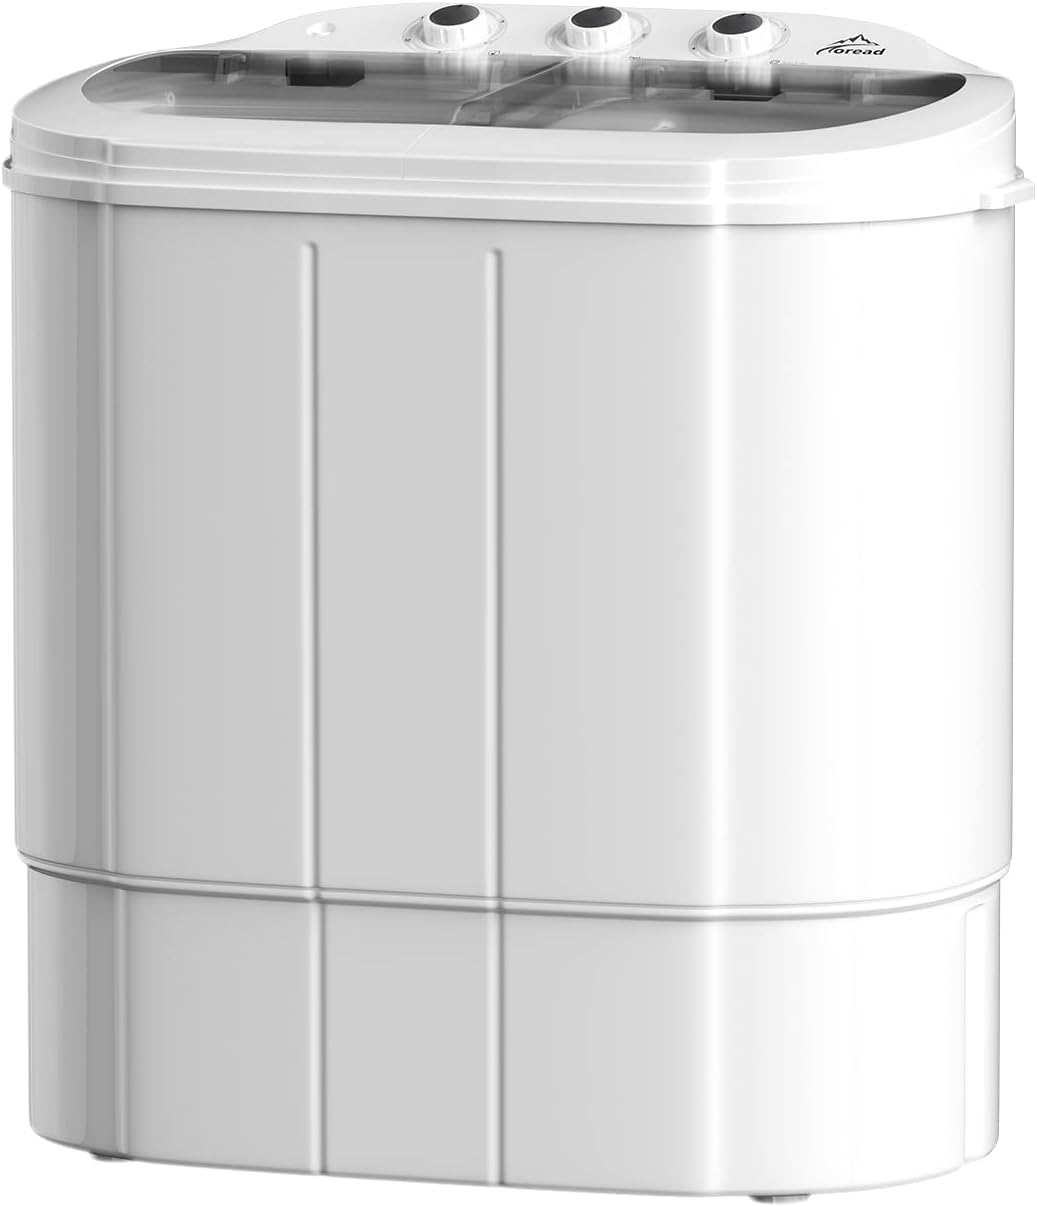 TOREAD Portable Small Washing Machine, 13.5Lbs Mini Compact Washer and Dryer Combo, 2 in 1 Apartment Washers with Twin Tub for Laundry, Dorms, College, RV, Camping